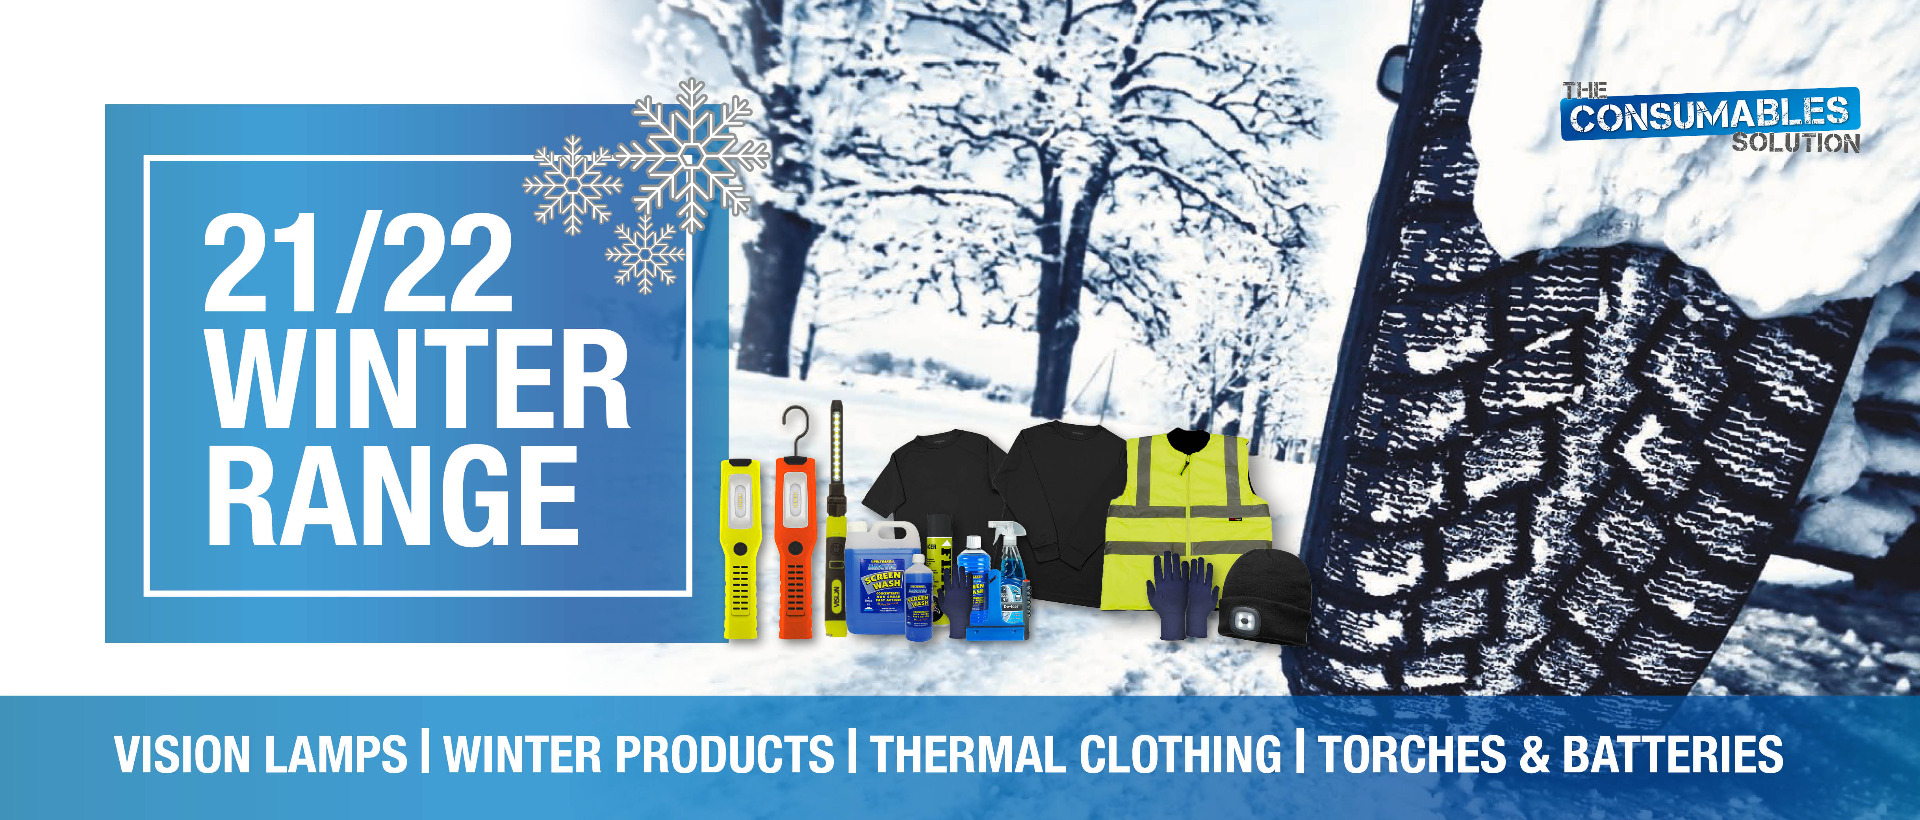 21/22 Winter Range - Vision lamps, Winter Products, Thermal Clothing, Torches and Batteries